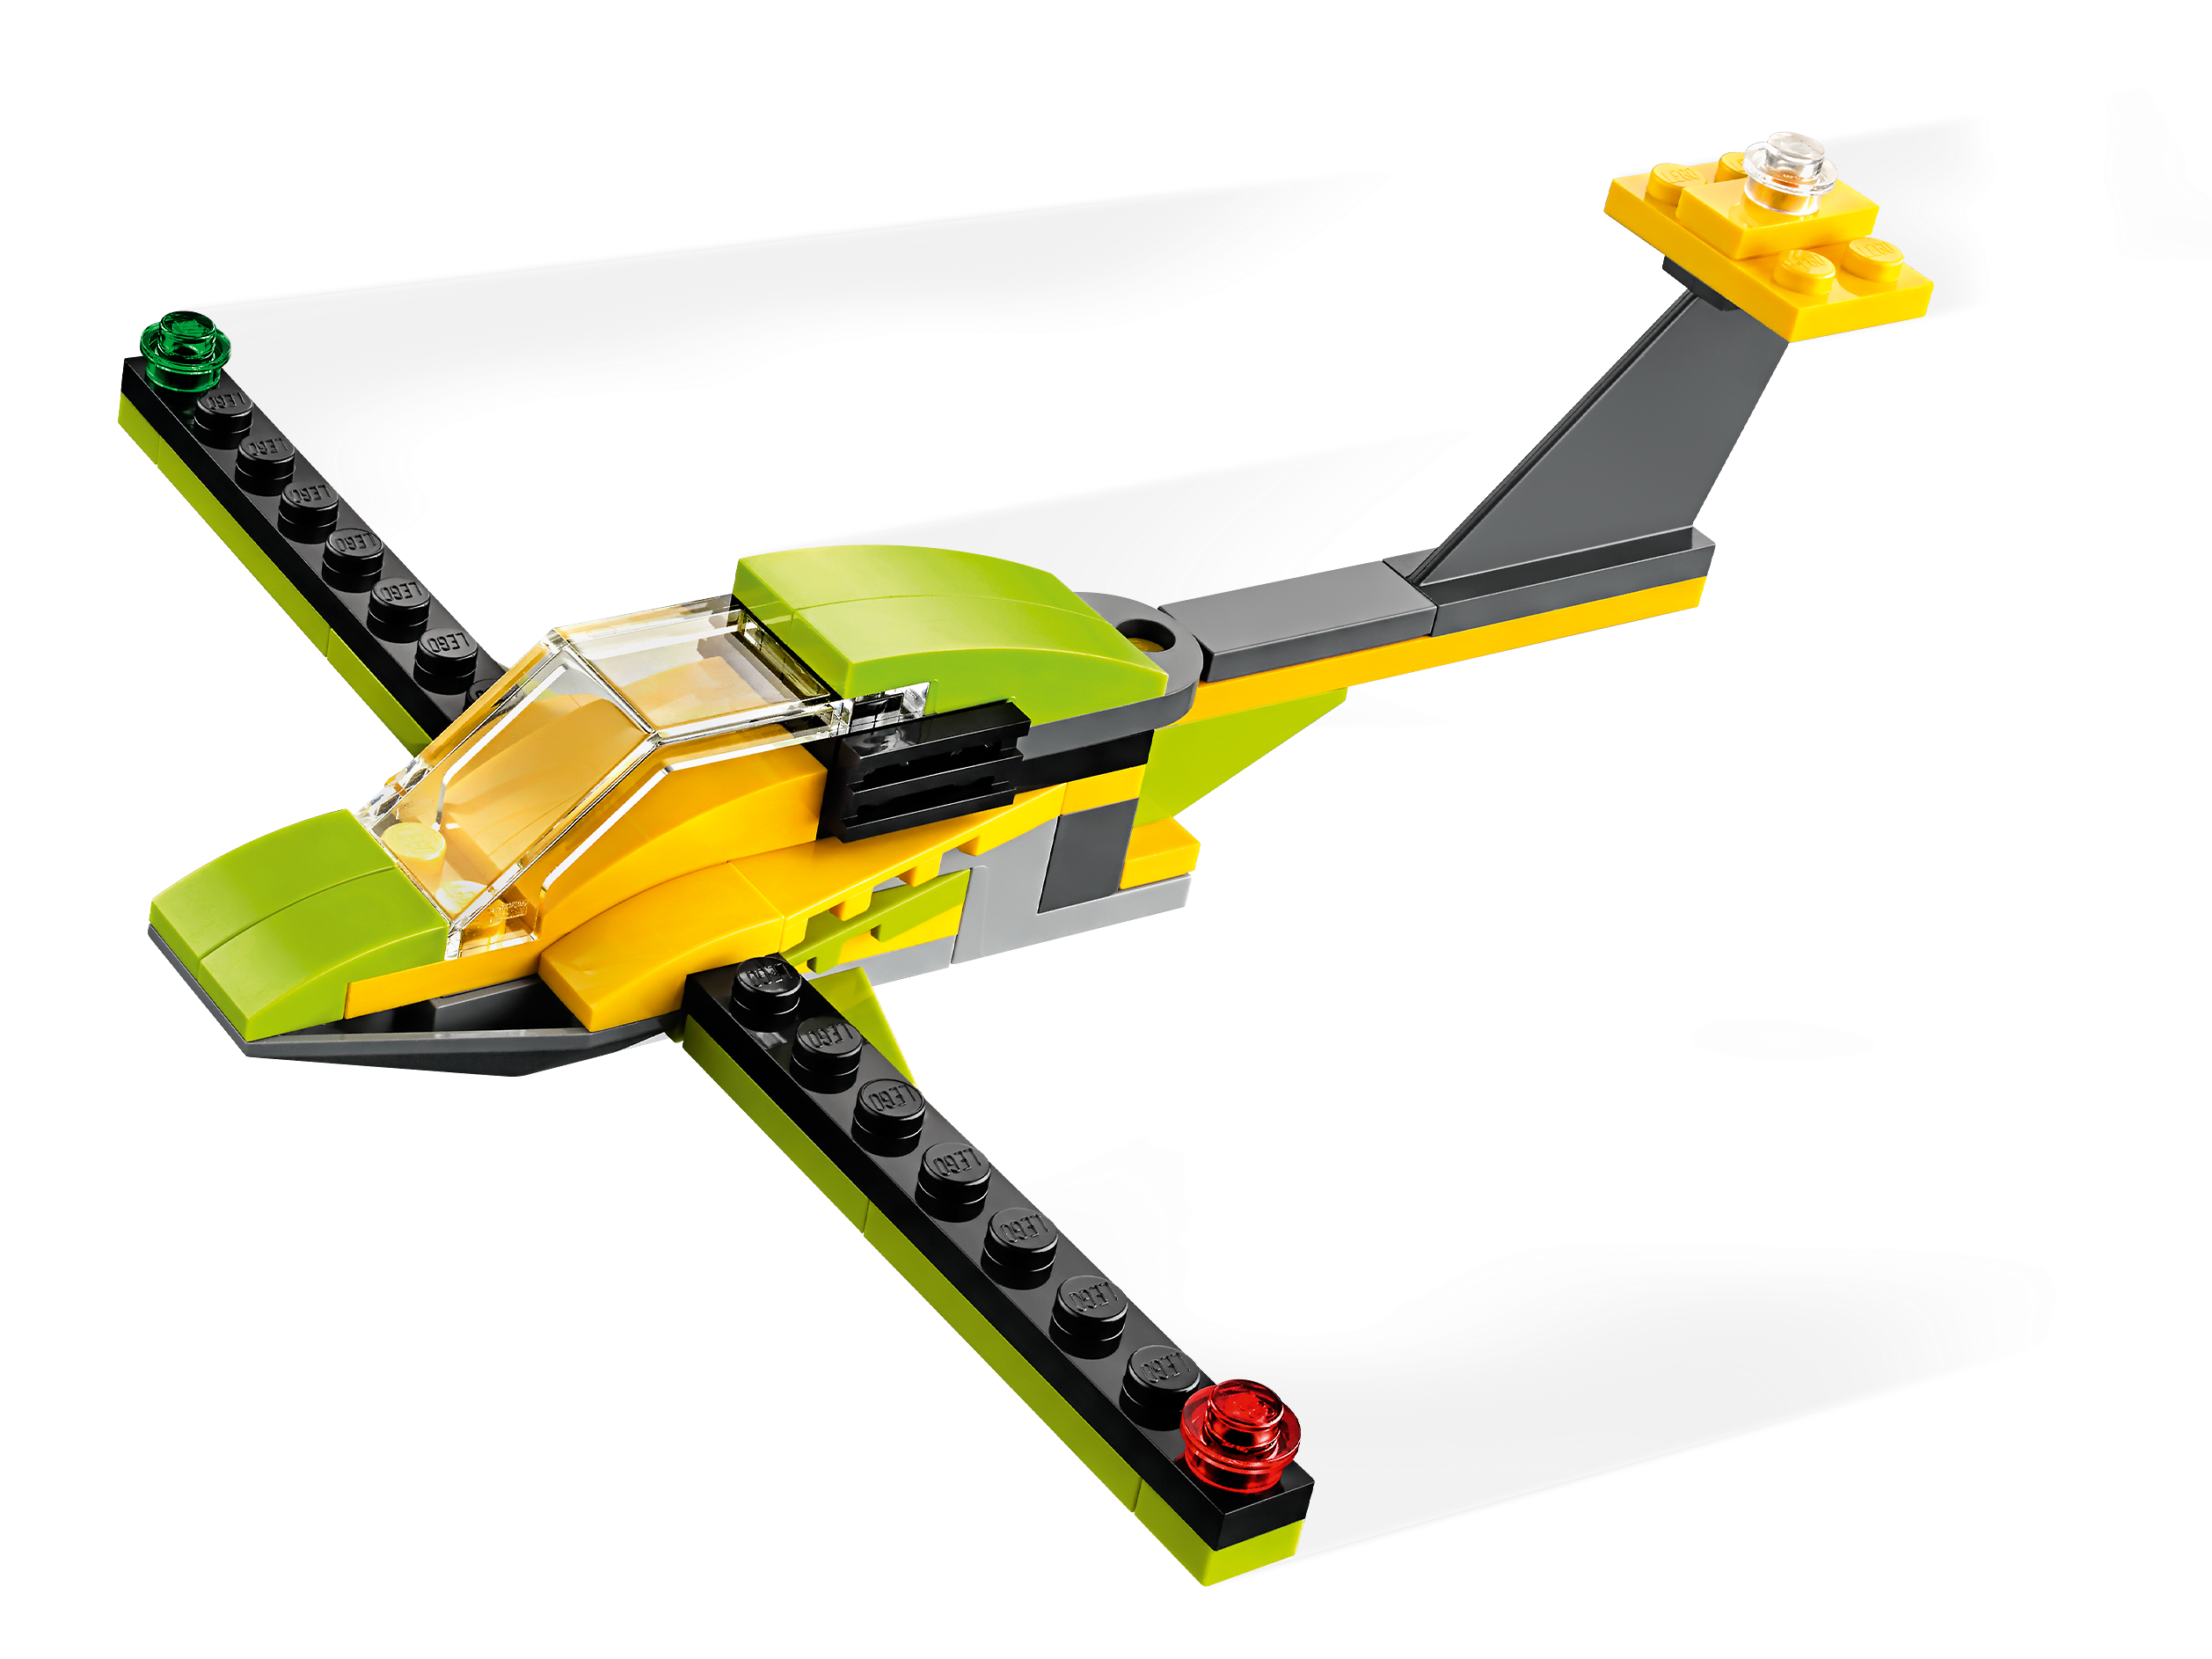 Helicopter Adventure | Creator 3-in-1 | Buy online at Official LEGO® Shop